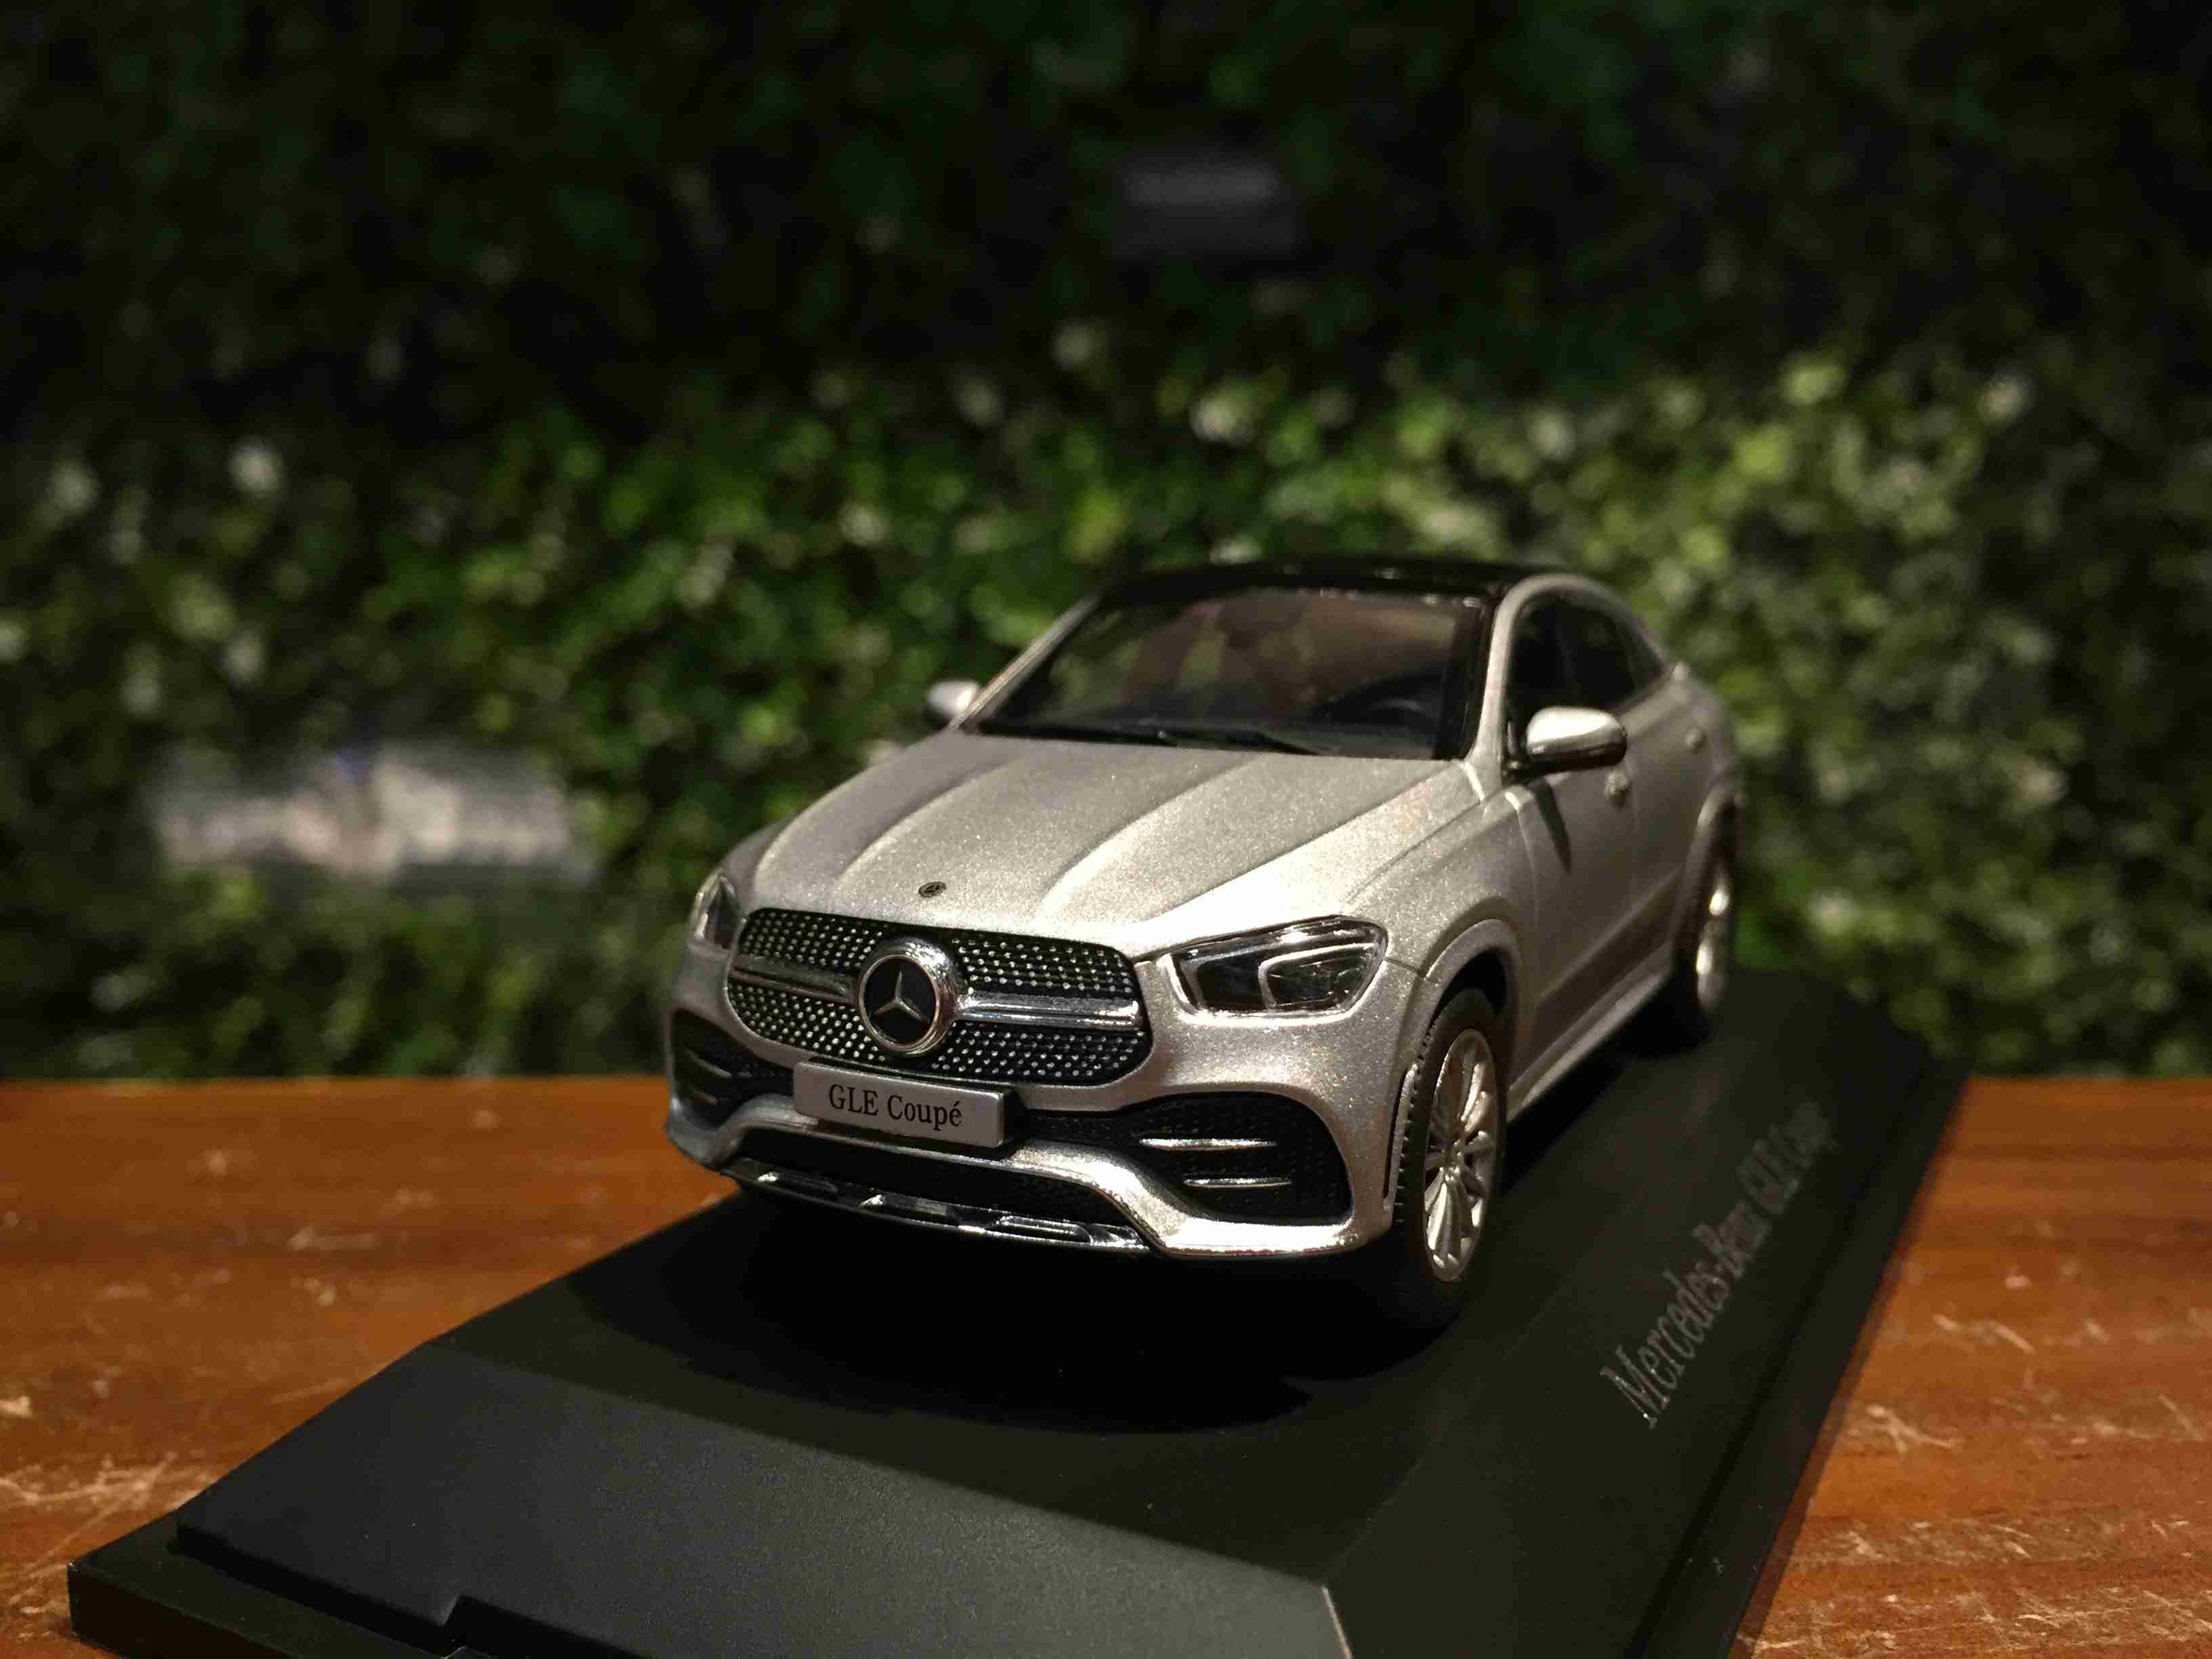 - 2020-1430000000141 C167 I-SCALE 1/43 MERCEDES-BENZ GLE COUPE 